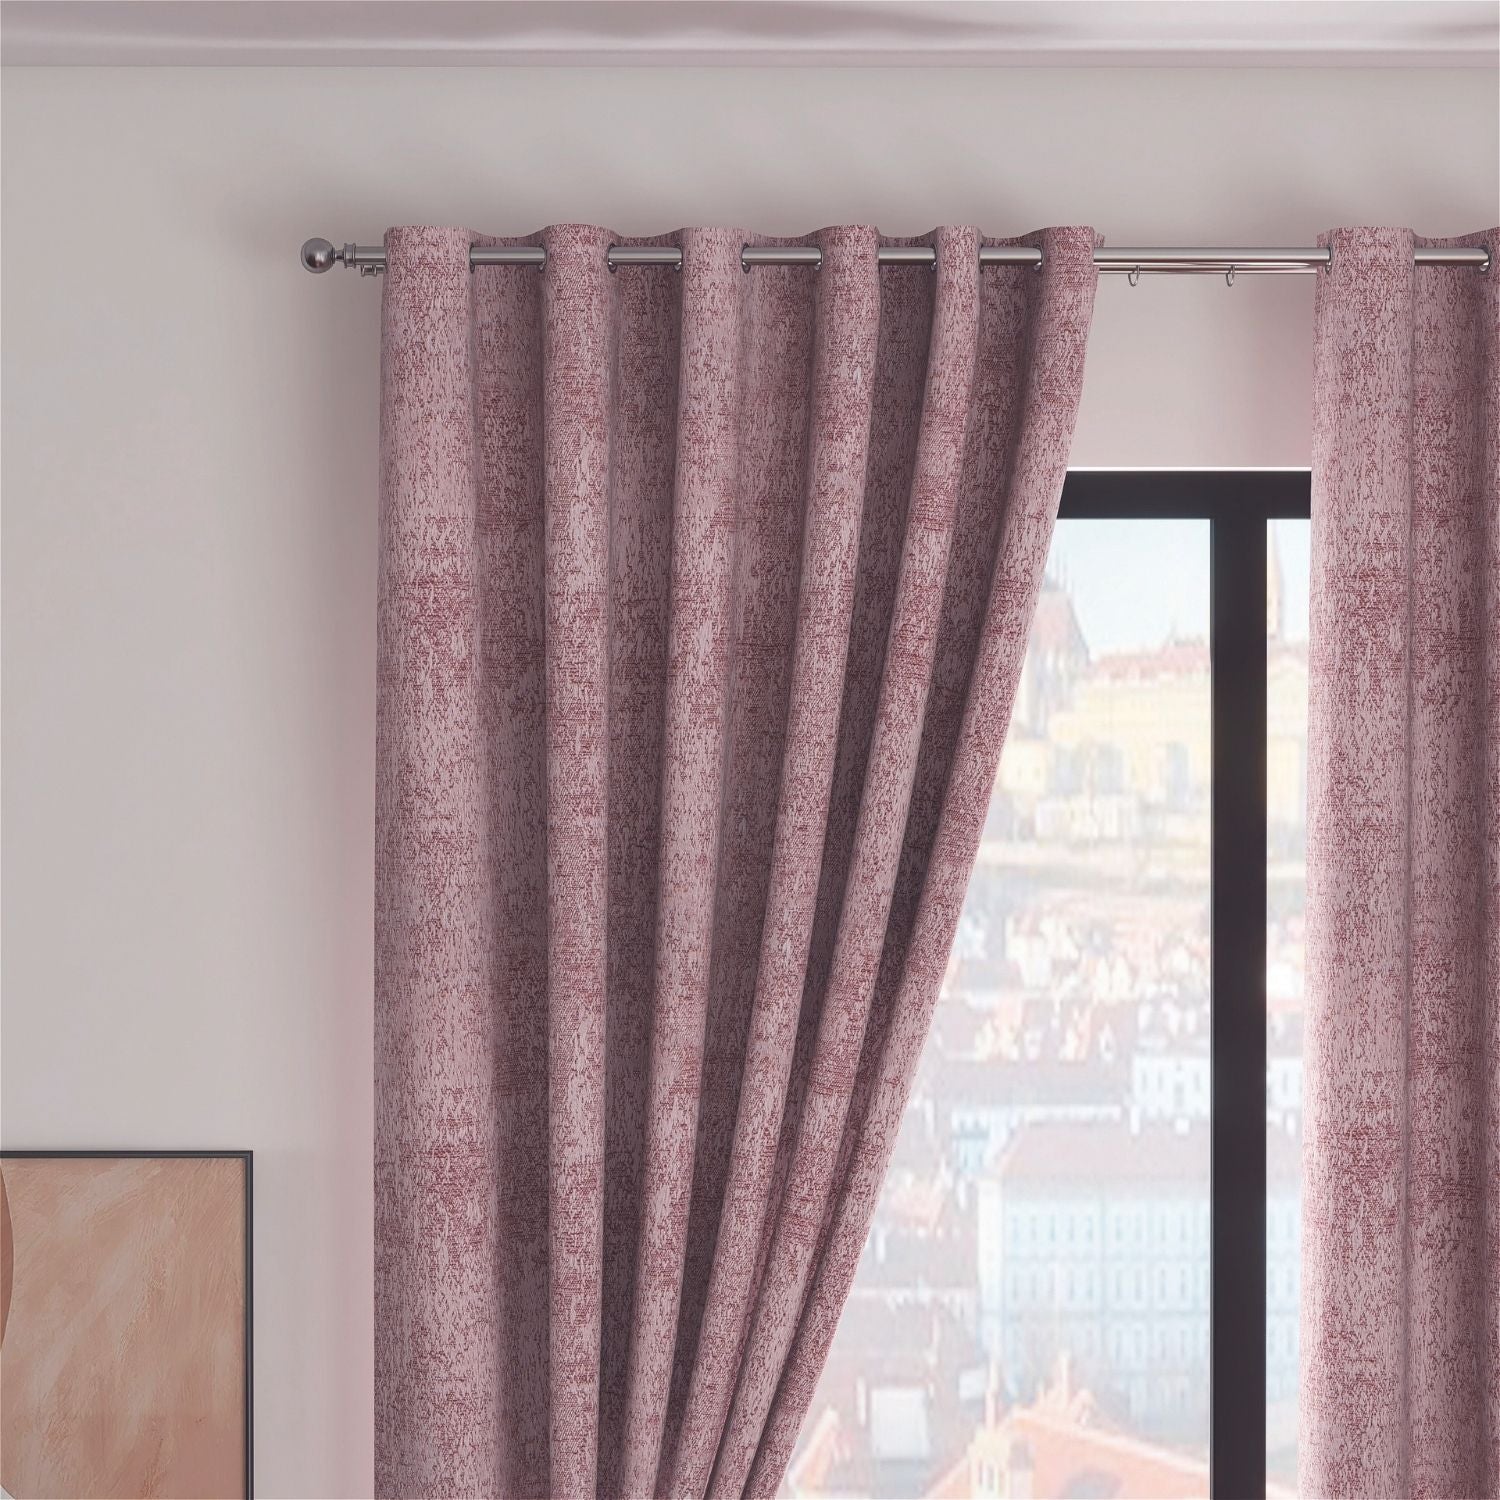 The Home Living Room Fiesta Ring Top Curtains - Blossom 2 Shaws Department Stores